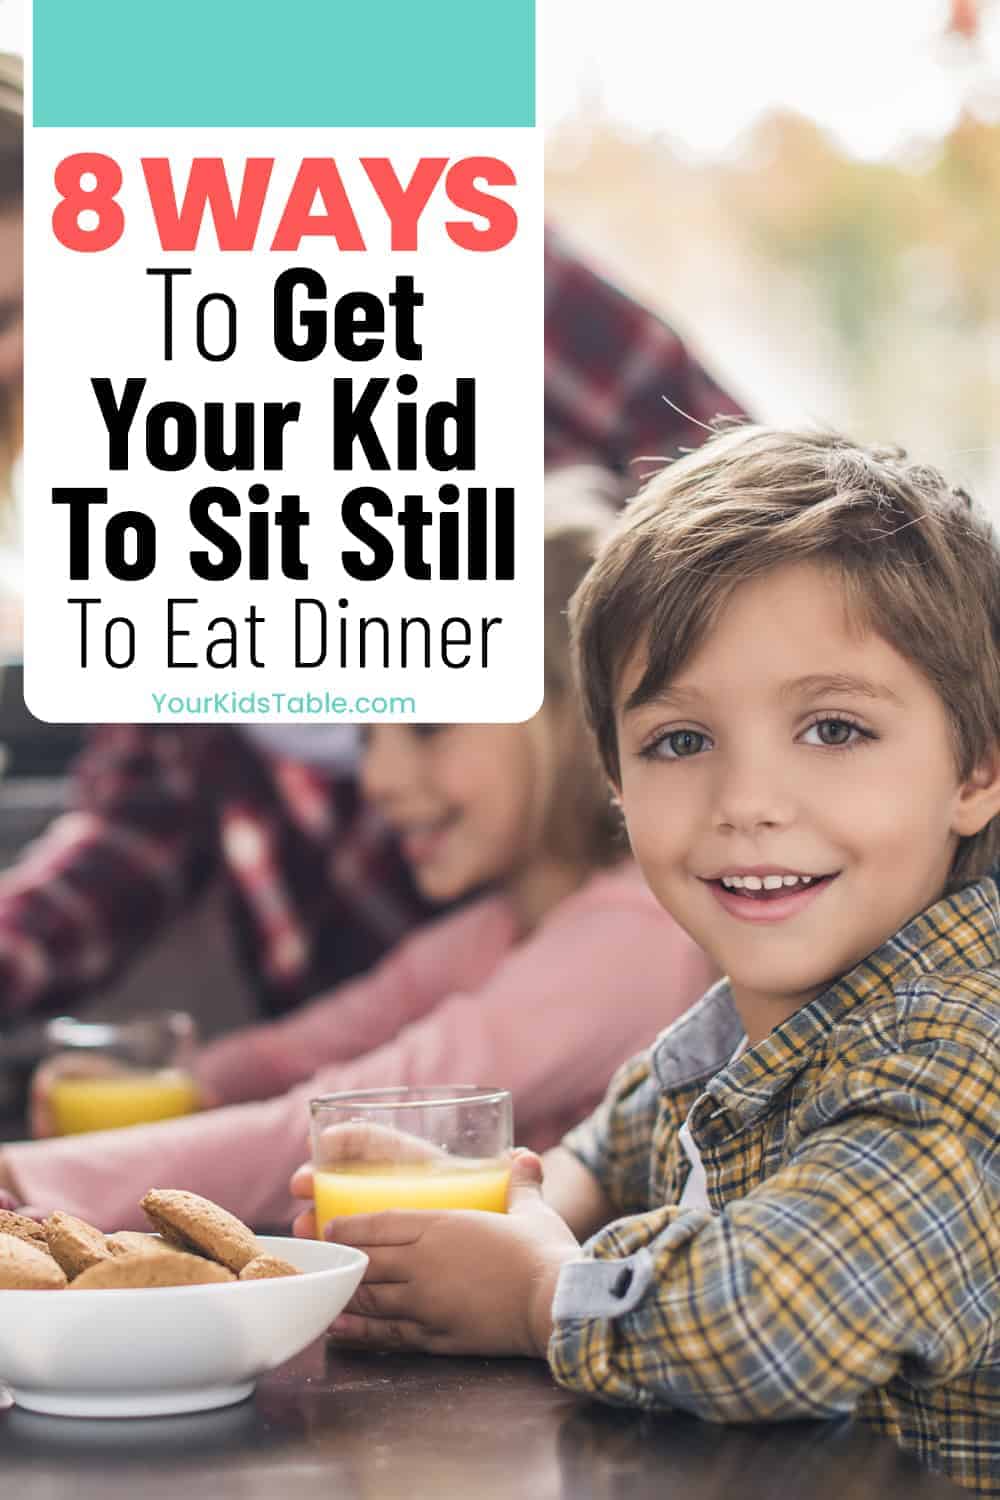 Learn how to get your child to sit still for dinner, lunch, or any meal whether they’re 2, 3, 4, 5, or 6+ years old with these tricks from an occupational therapist! 